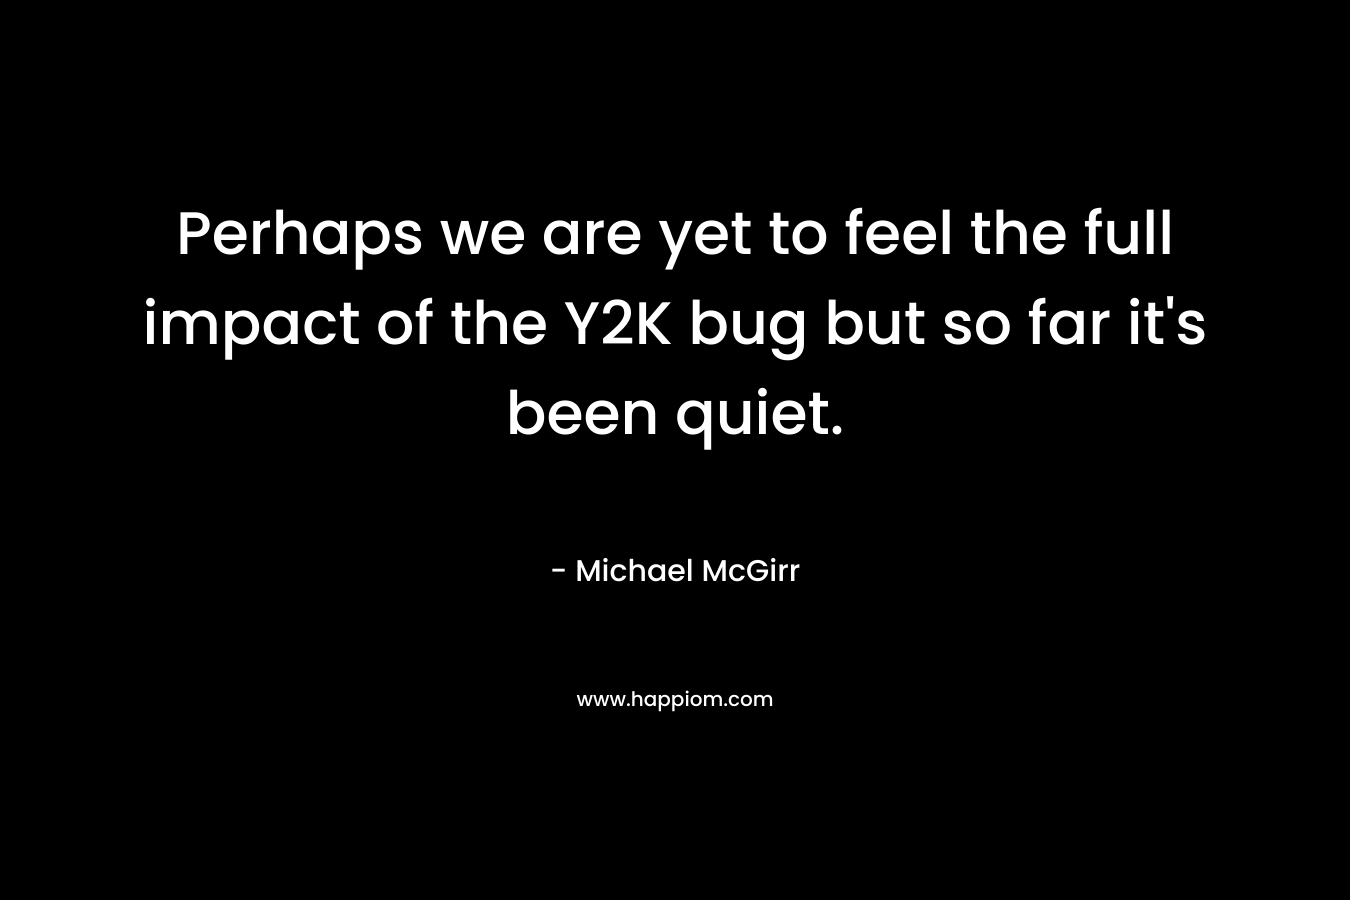 Perhaps we are yet to feel the full impact of the Y2K bug but so far it’s been quiet. – Michael McGirr